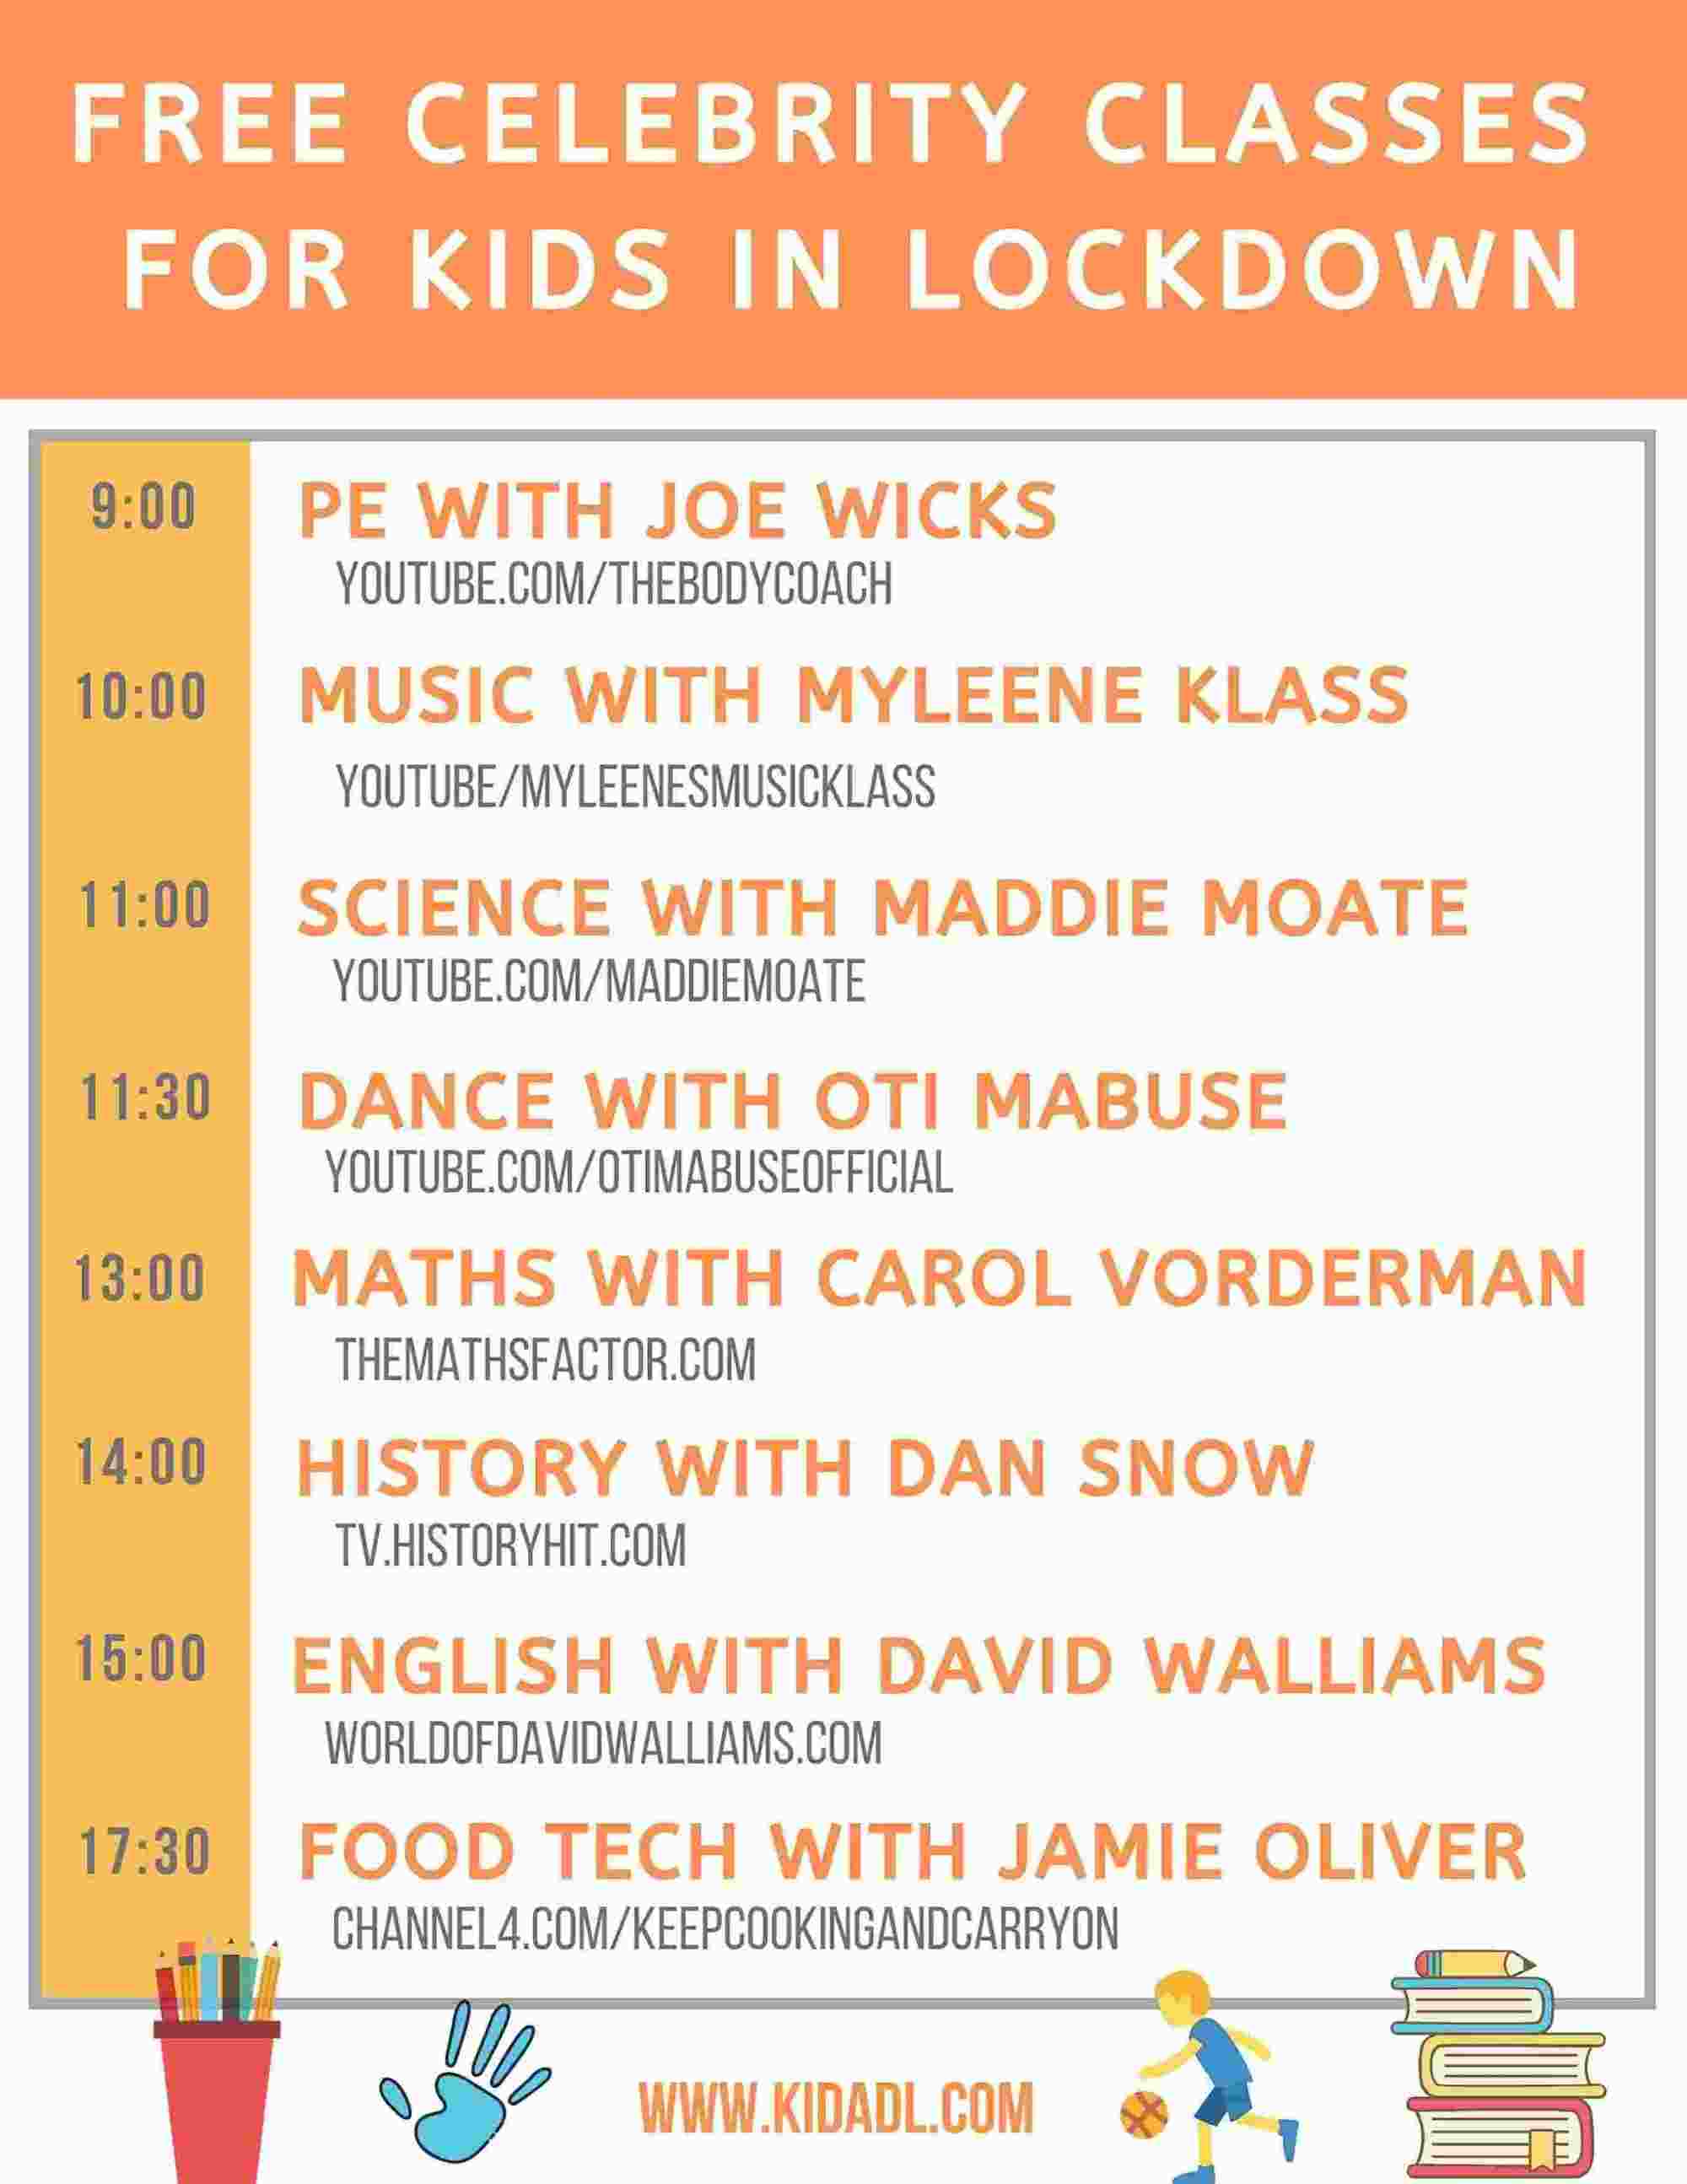 celebrity lessons that are free for kids in lockdown